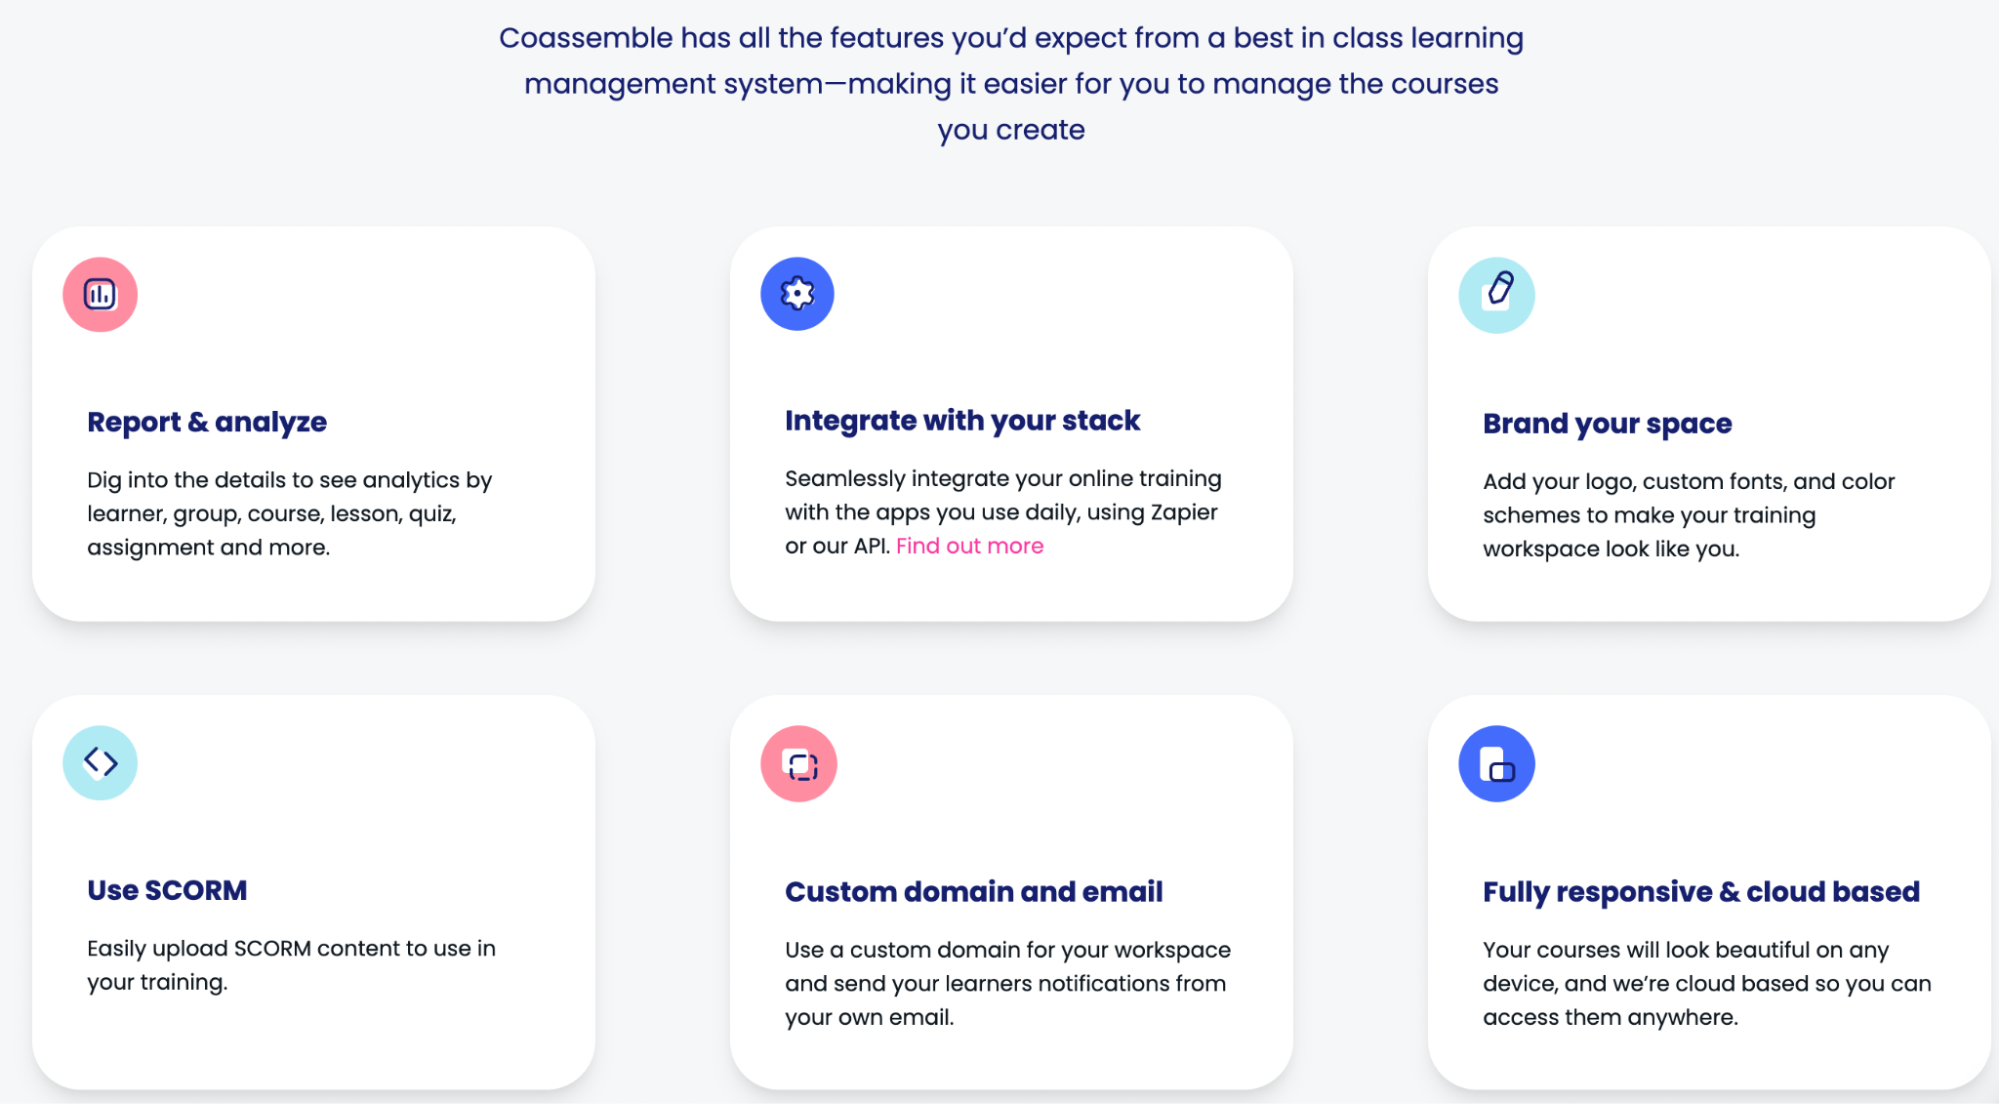 Get all the features you need to create courses